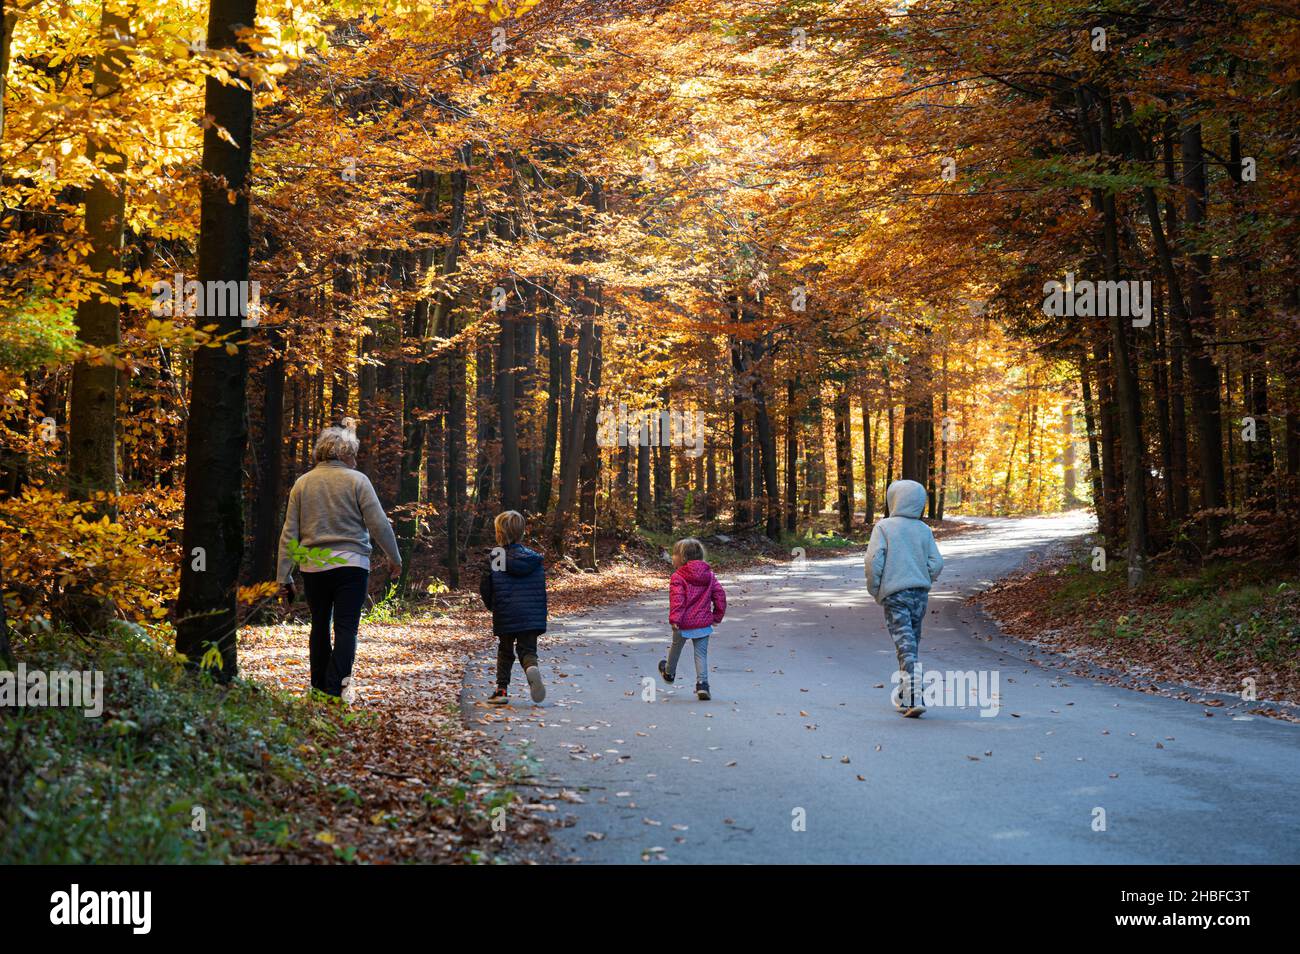 Rear view of a gradfather with his three grandchildren walking on a road through beautiful colorful autumn nature with sunlight coming through the tre Stock Photo